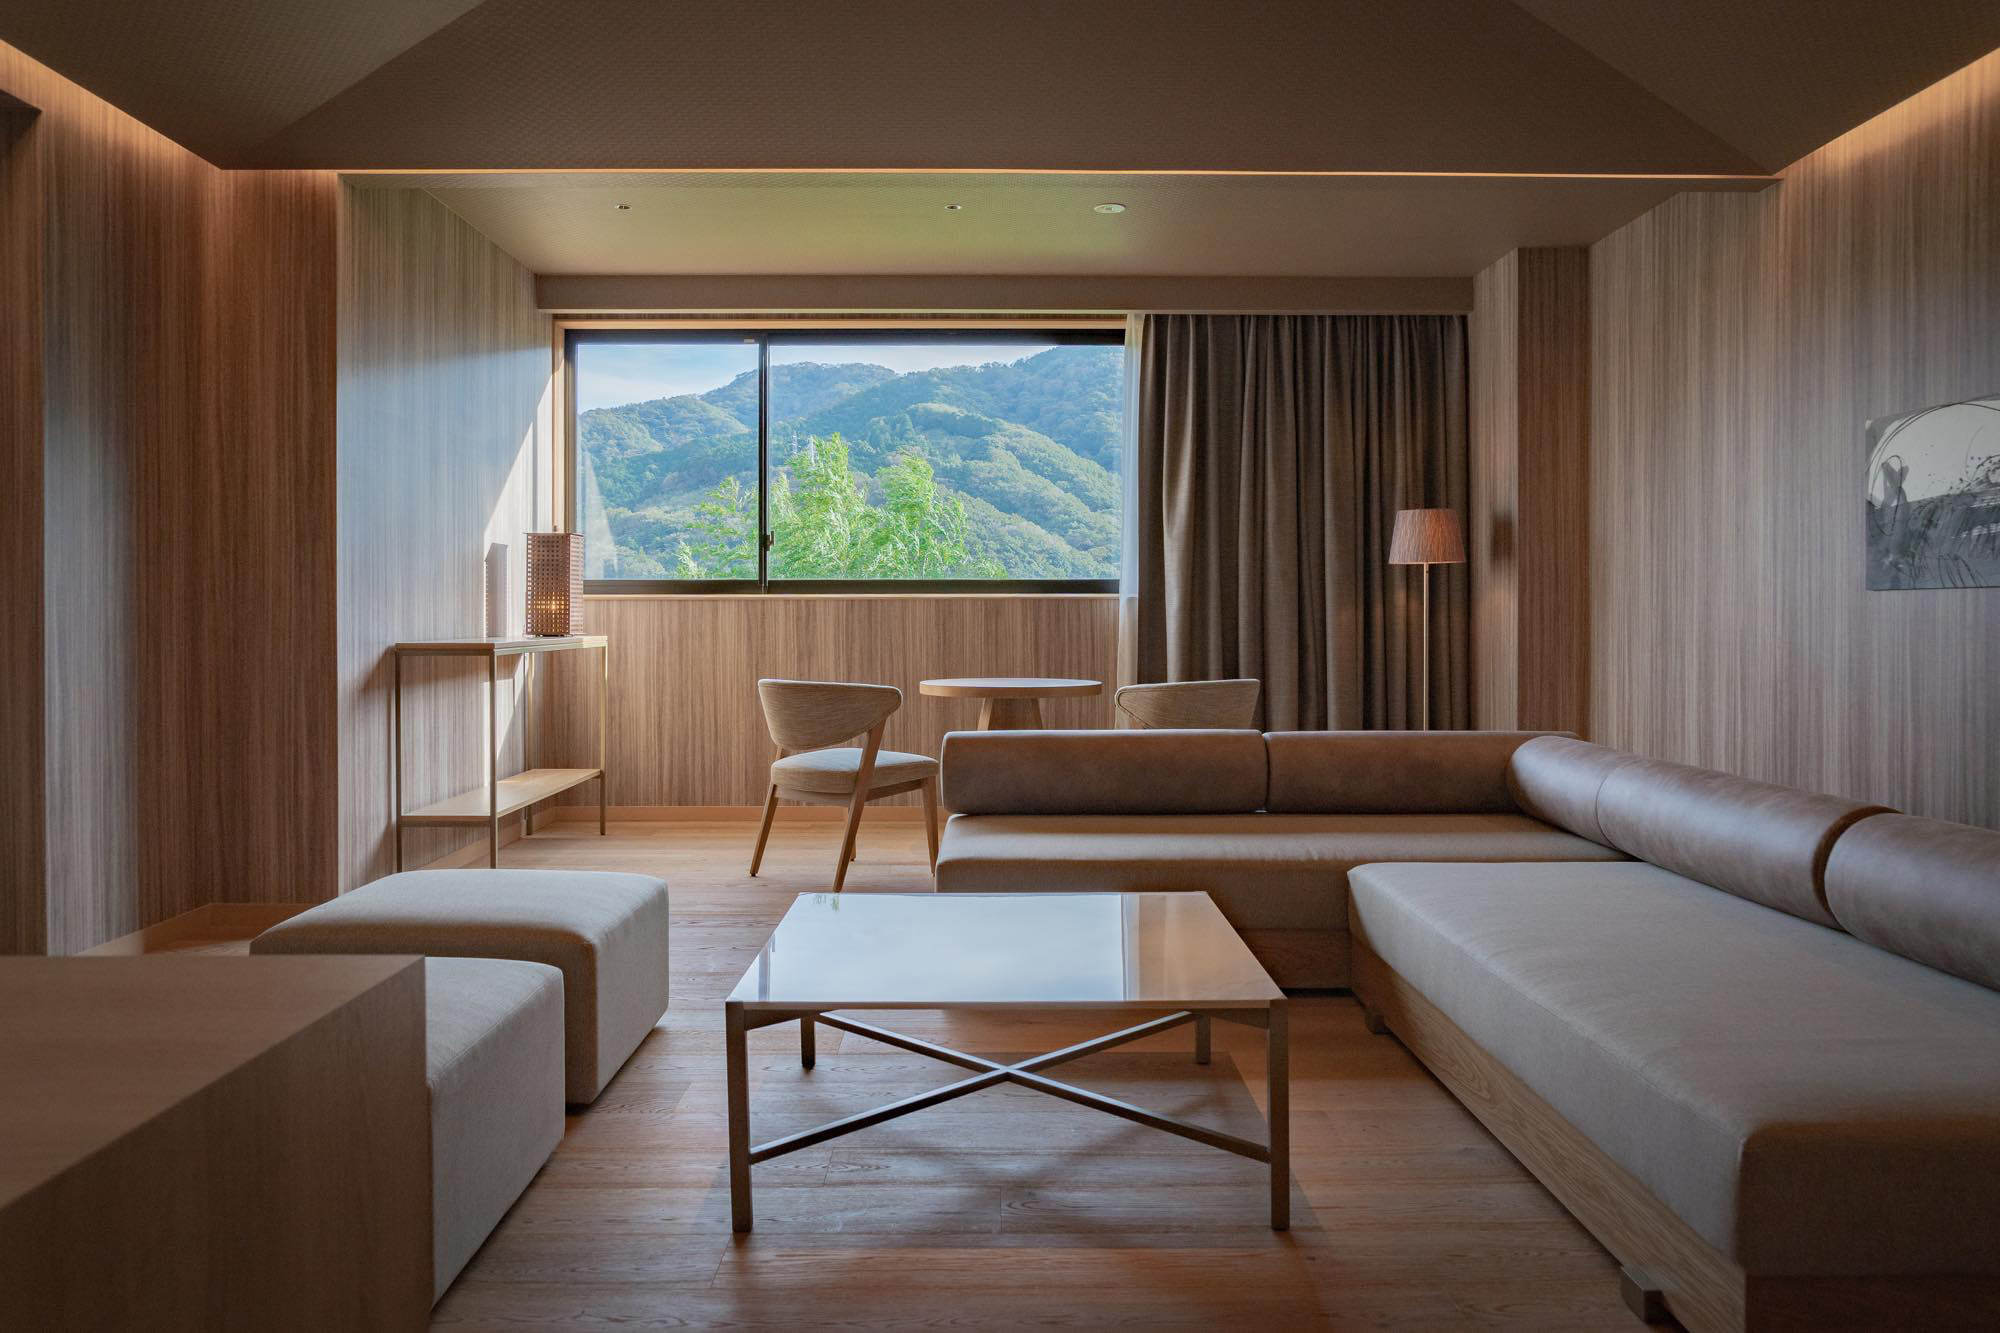 Miwa Yugawara features 17 guest rooms in total, including one suite room.